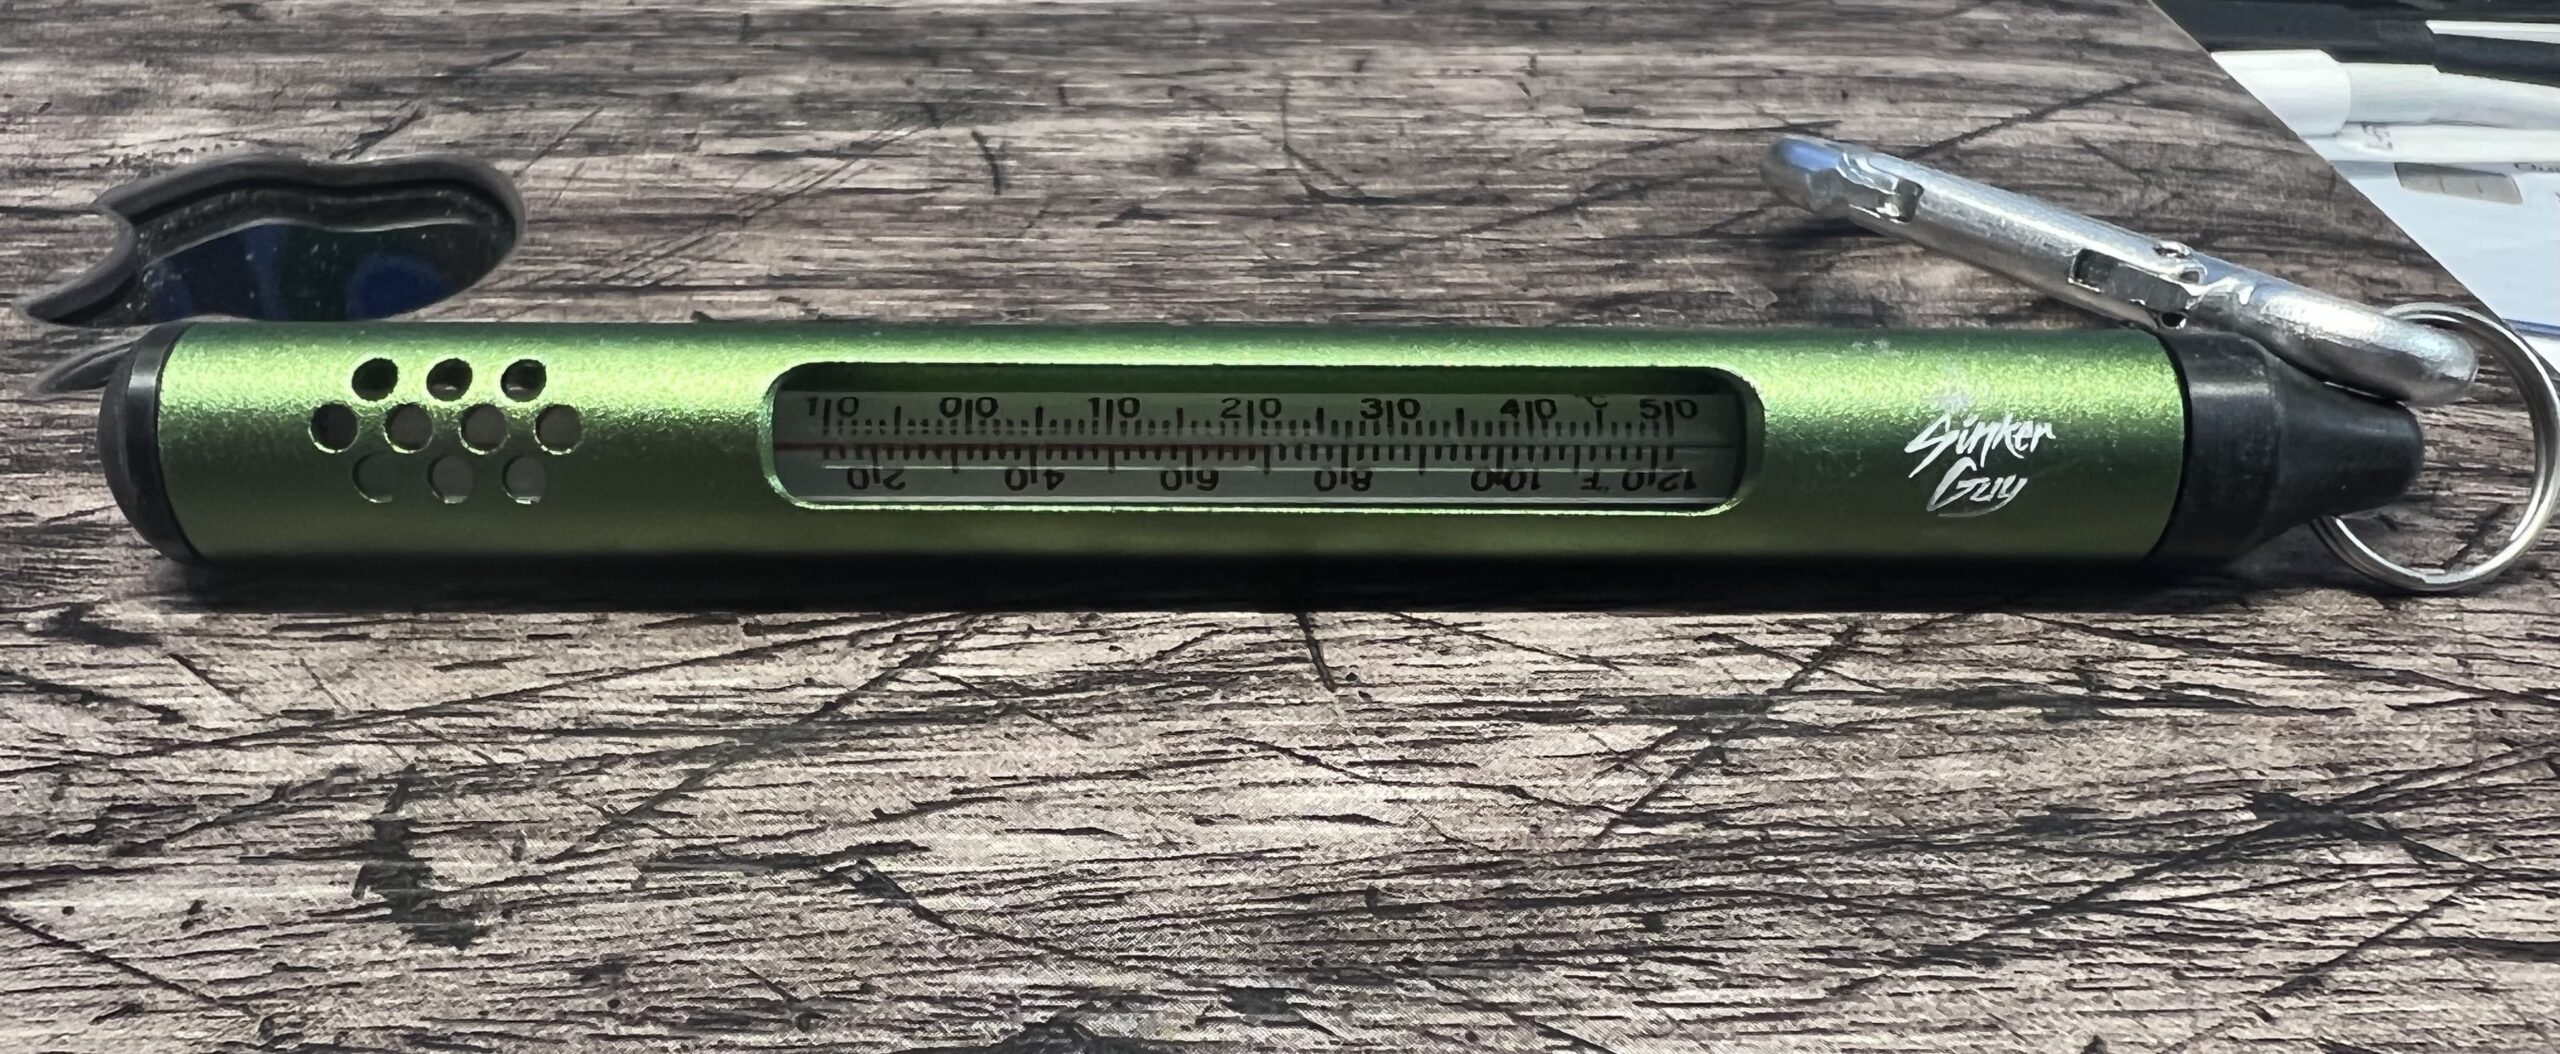 The Sinker Guy Thermometer